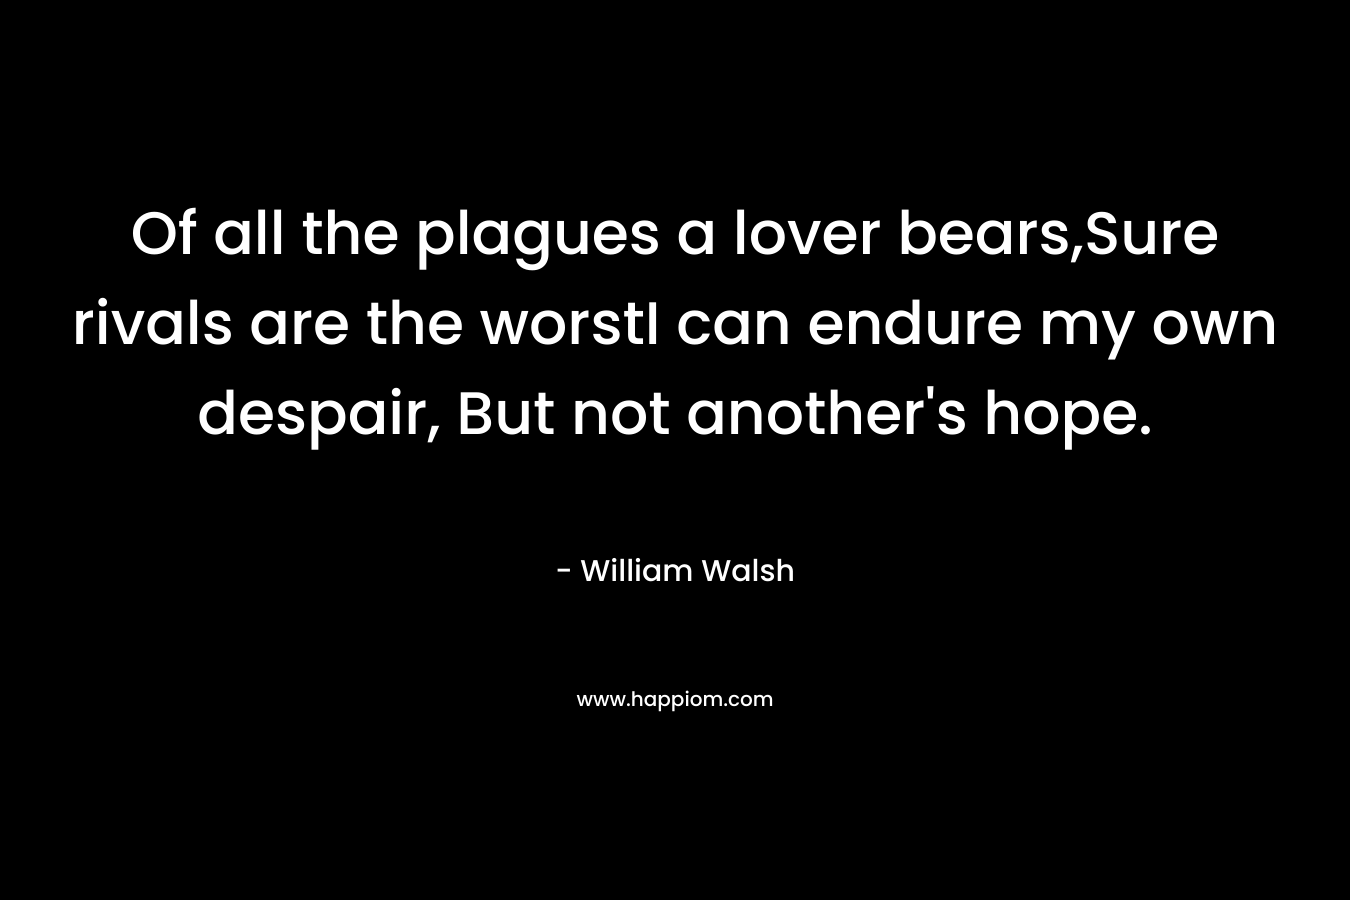 Of all the plagues a lover bears,Sure rivals are the worstI can endure my own despair, But not another’s hope. – William Walsh